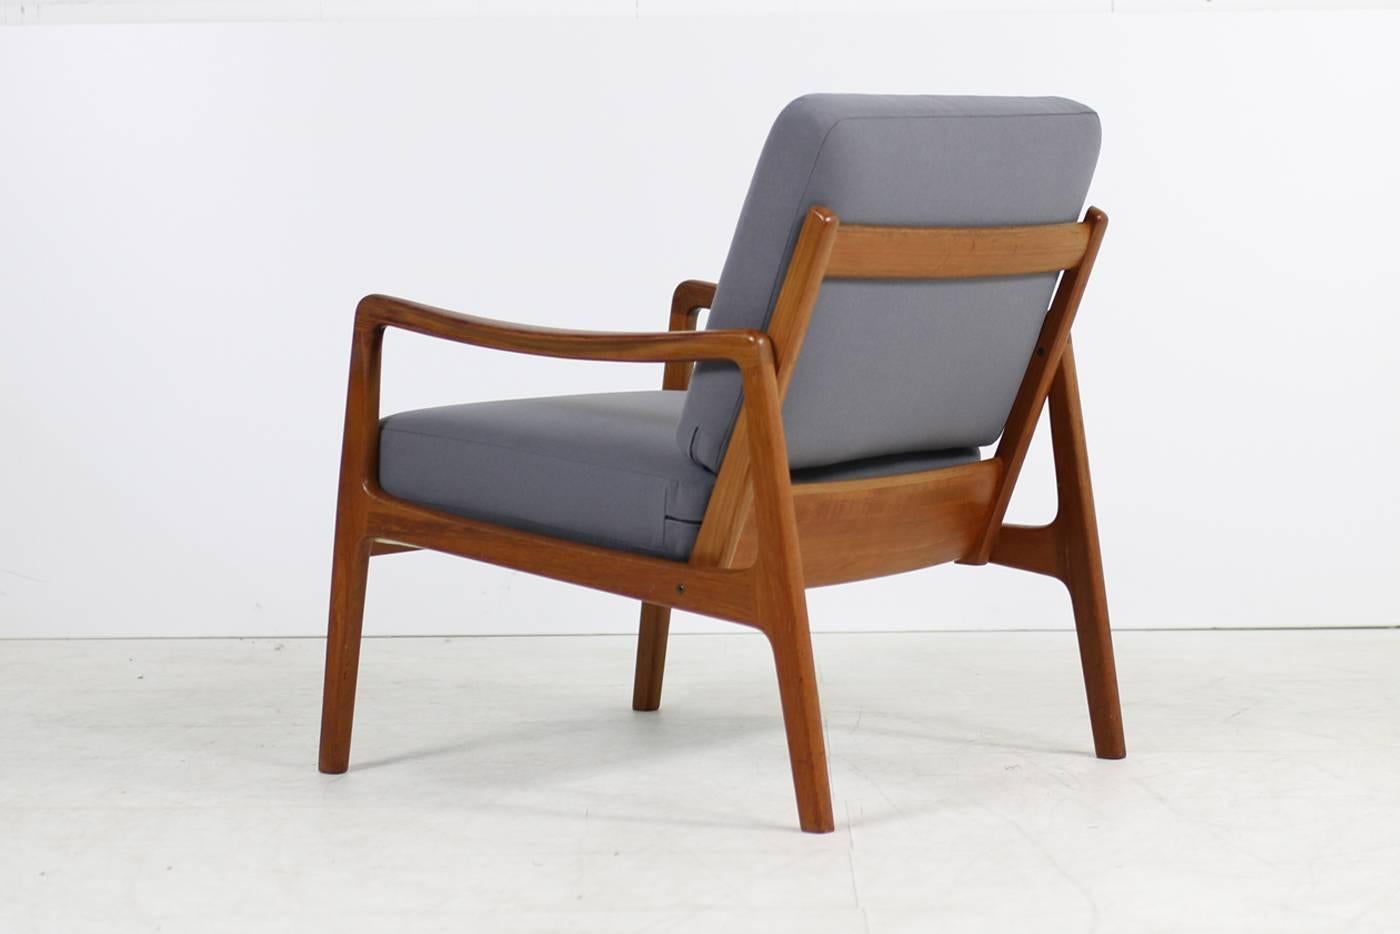 Beautiful 1960s Ole Wanscher teak easy chair, model 109 by France & Son, Denmark.
Very good vintage condition, cushions reupholstered and covered with new woven fabric, in light grey.